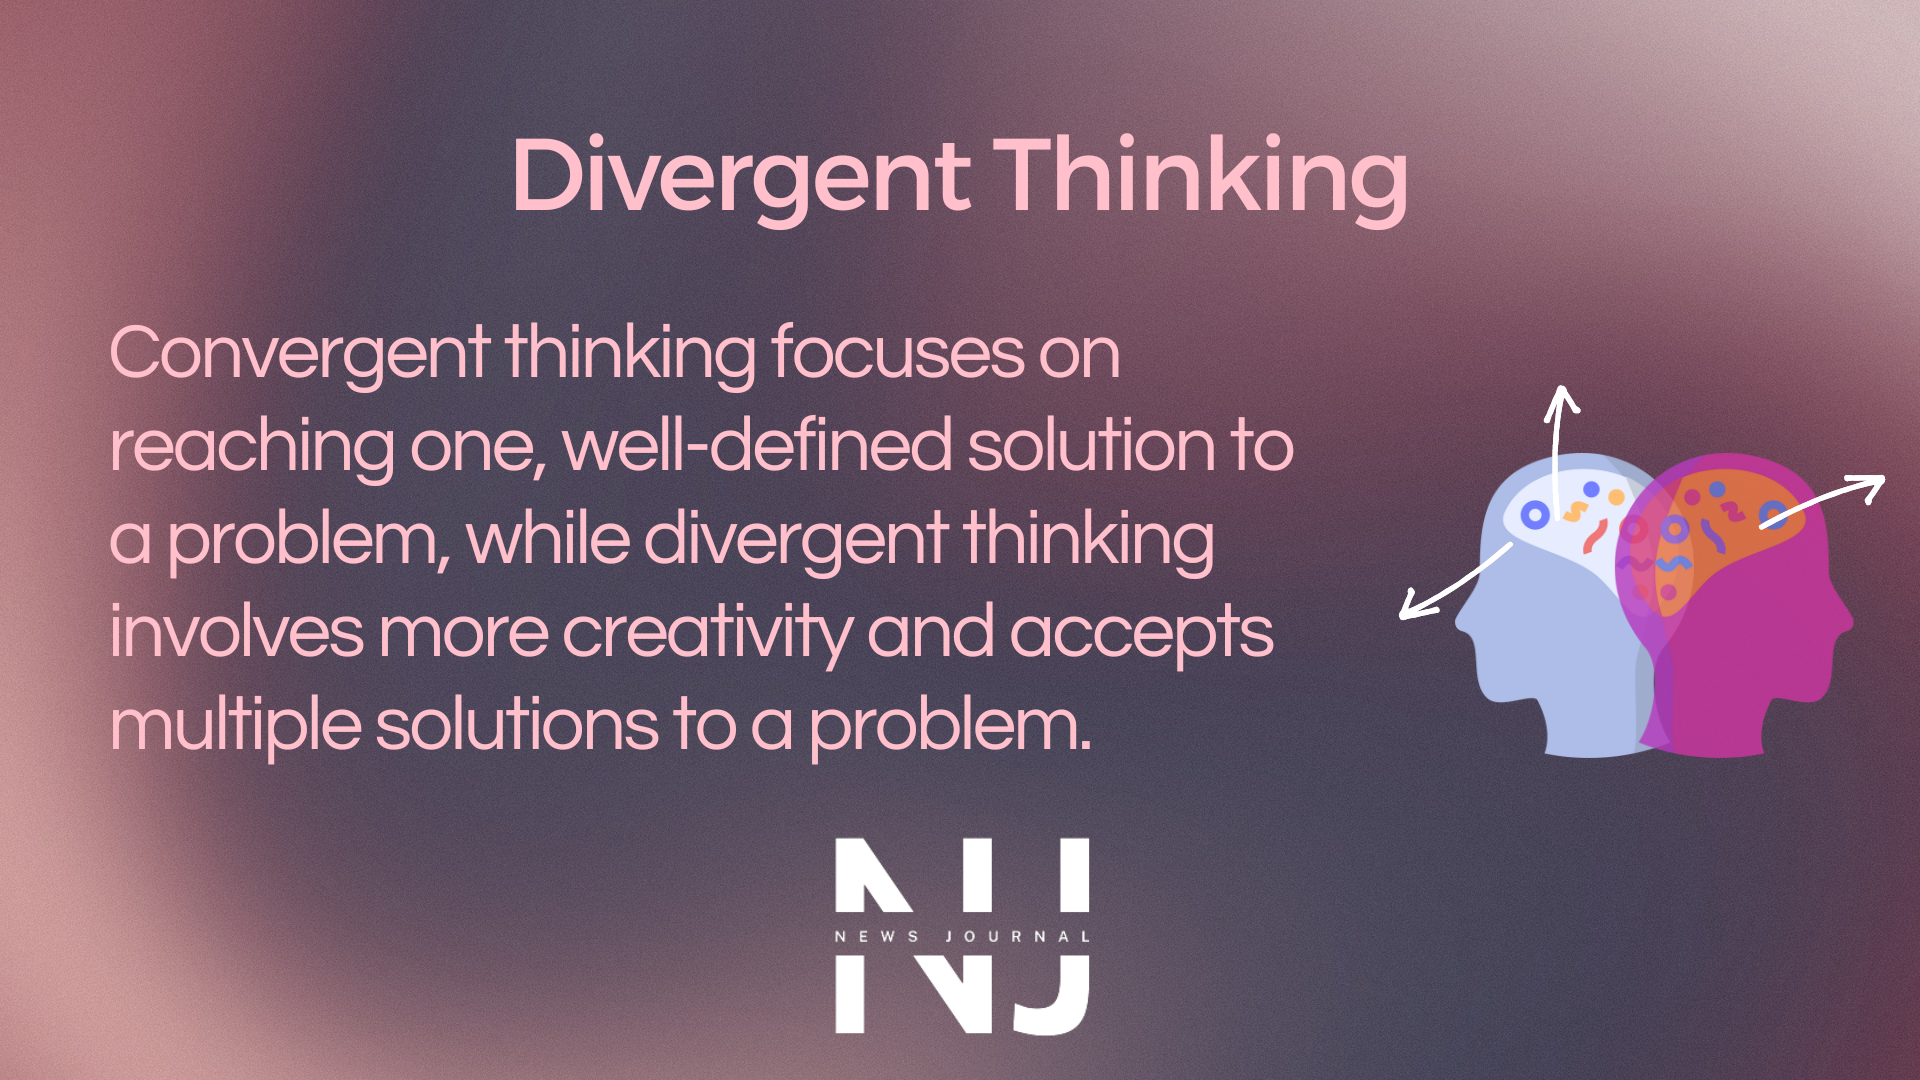 Divergent Thinking - What is it?